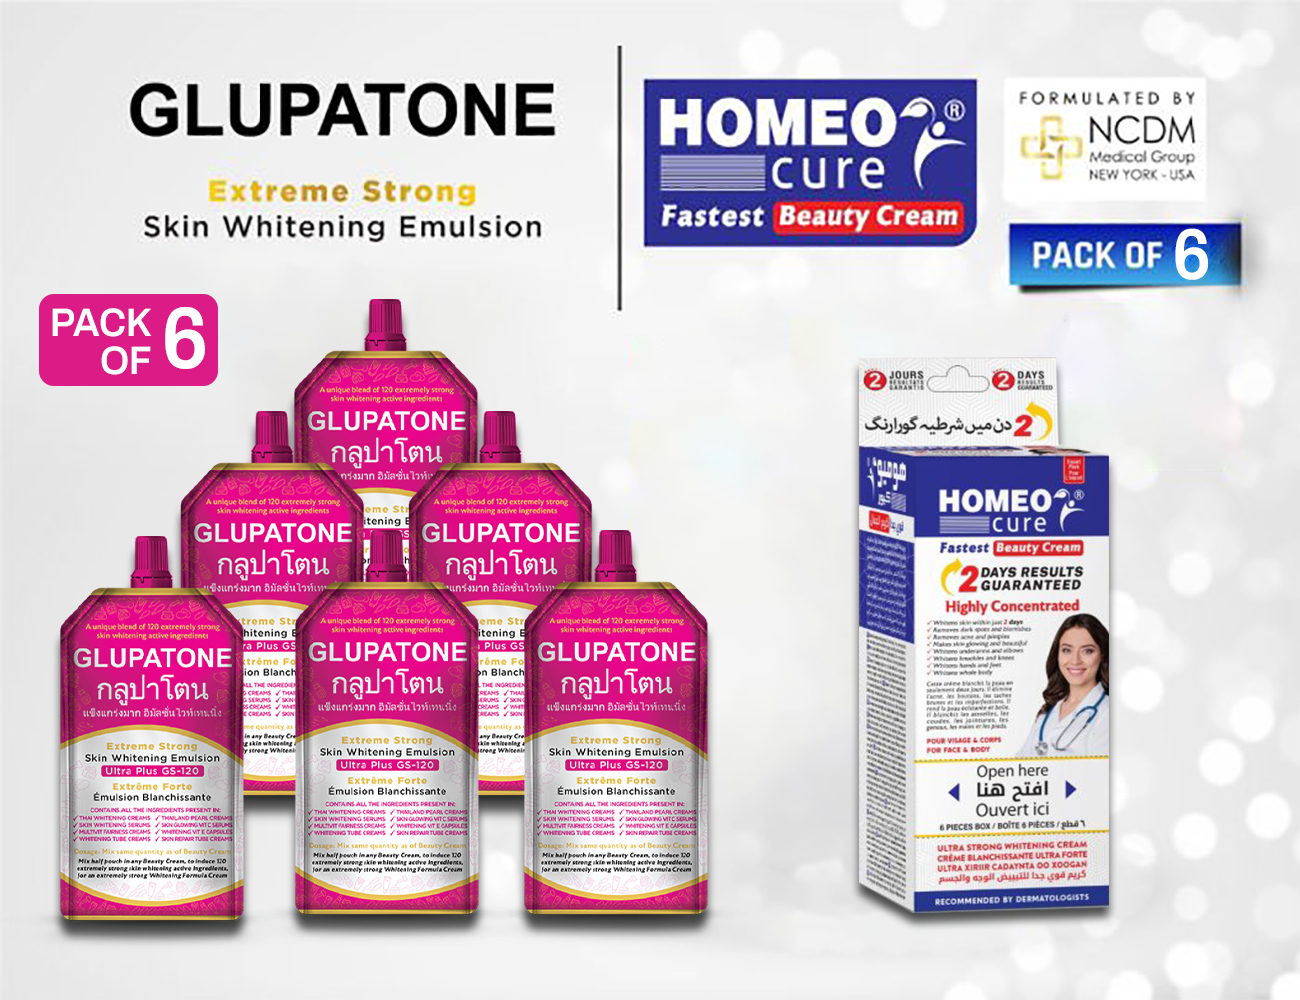 GLUPATONE Extreme Strong Whitening Emulsion 50 ml & Homeo cure pack of 6